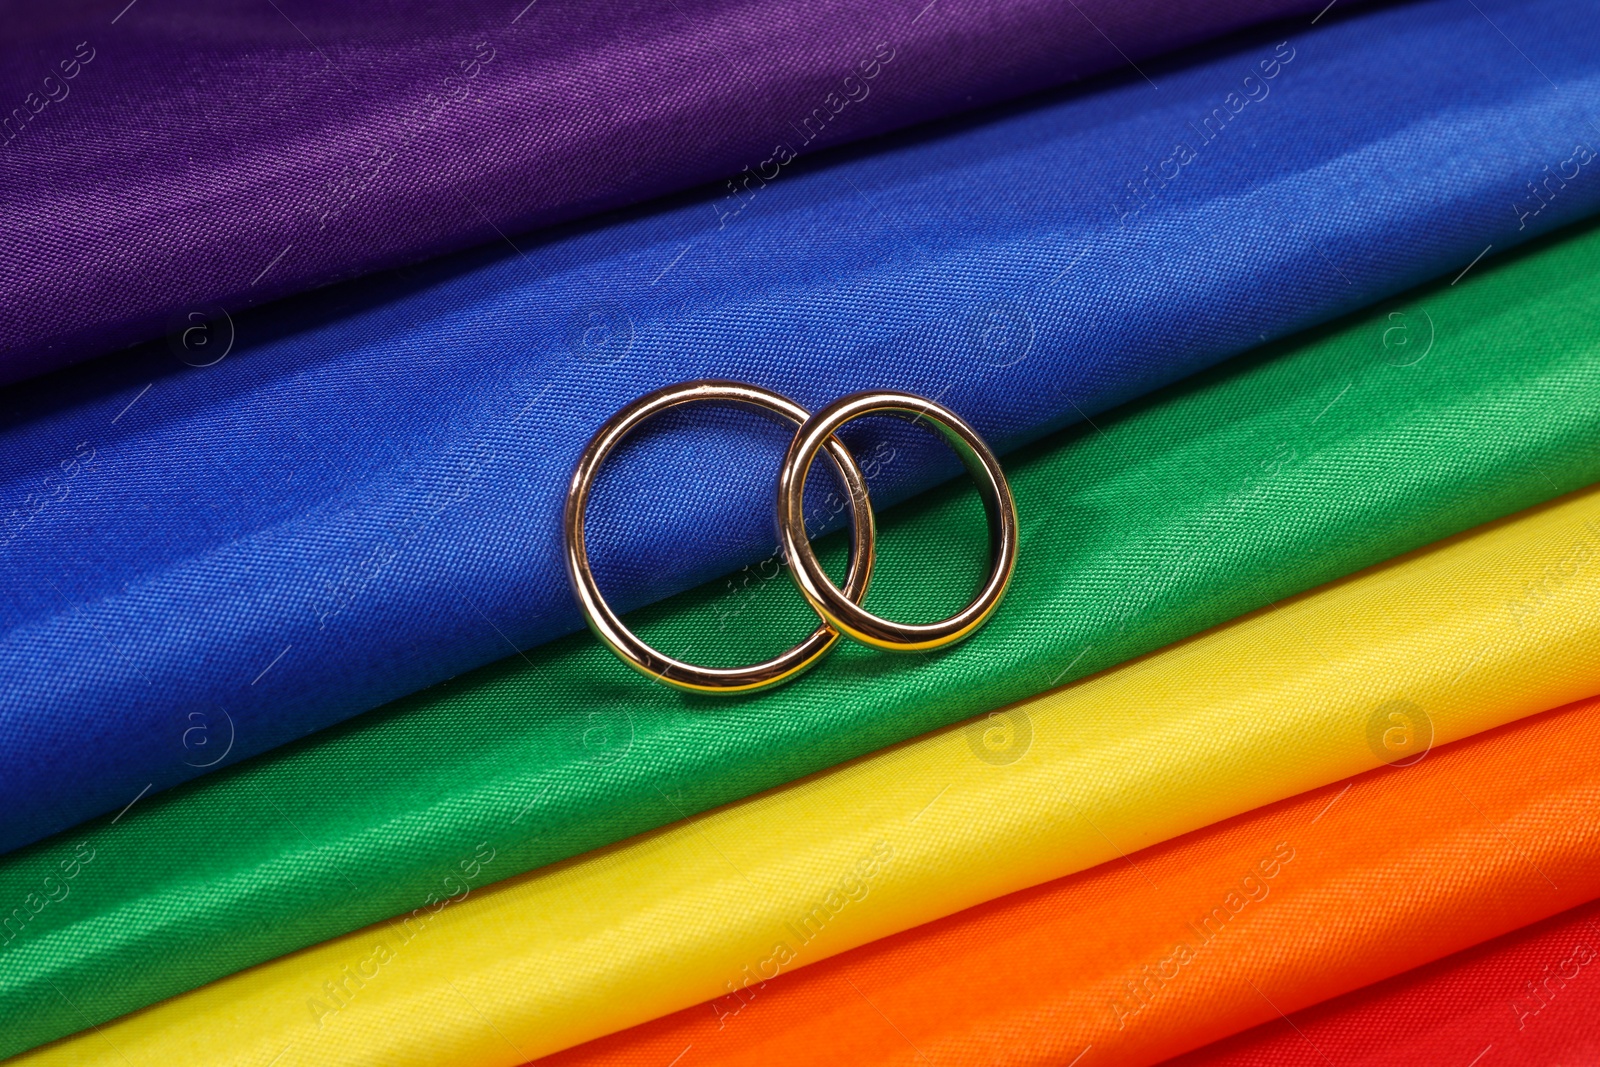 Photo of Wedding rings on rainbow LGBT flag, top view